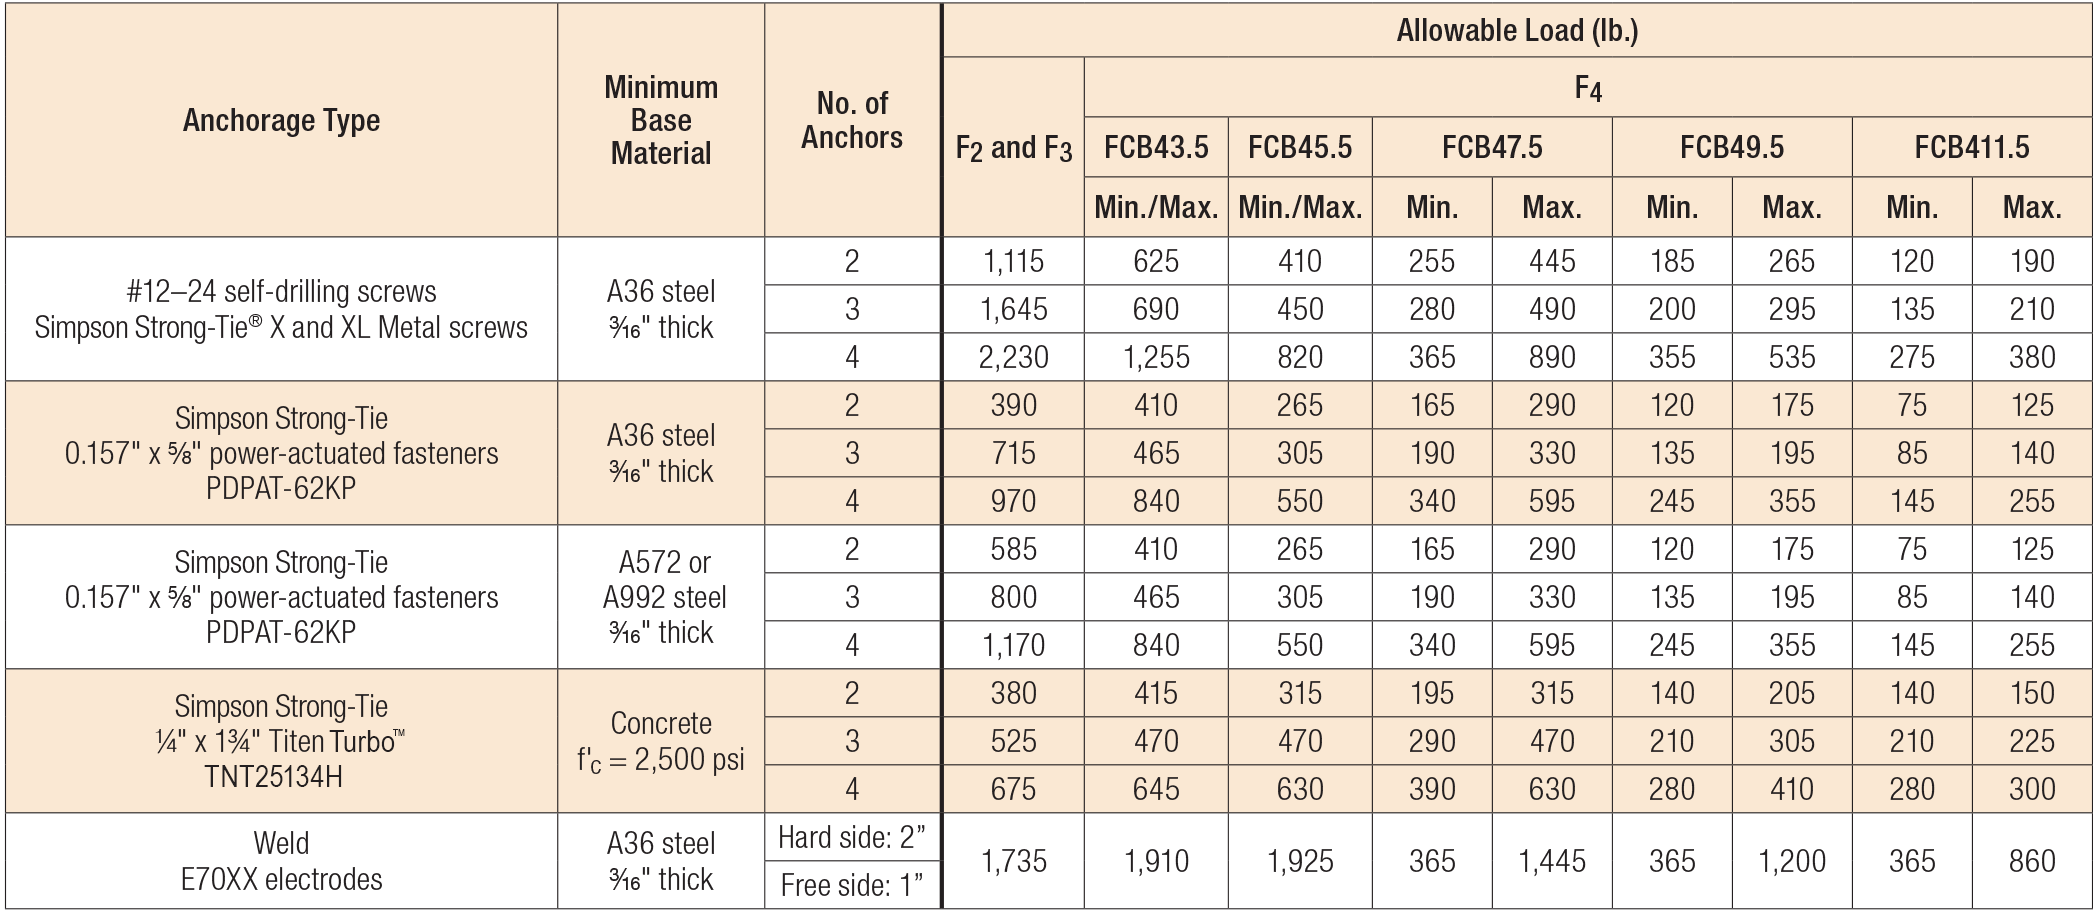 Load Table - FCB Allowable Anchorage Loads